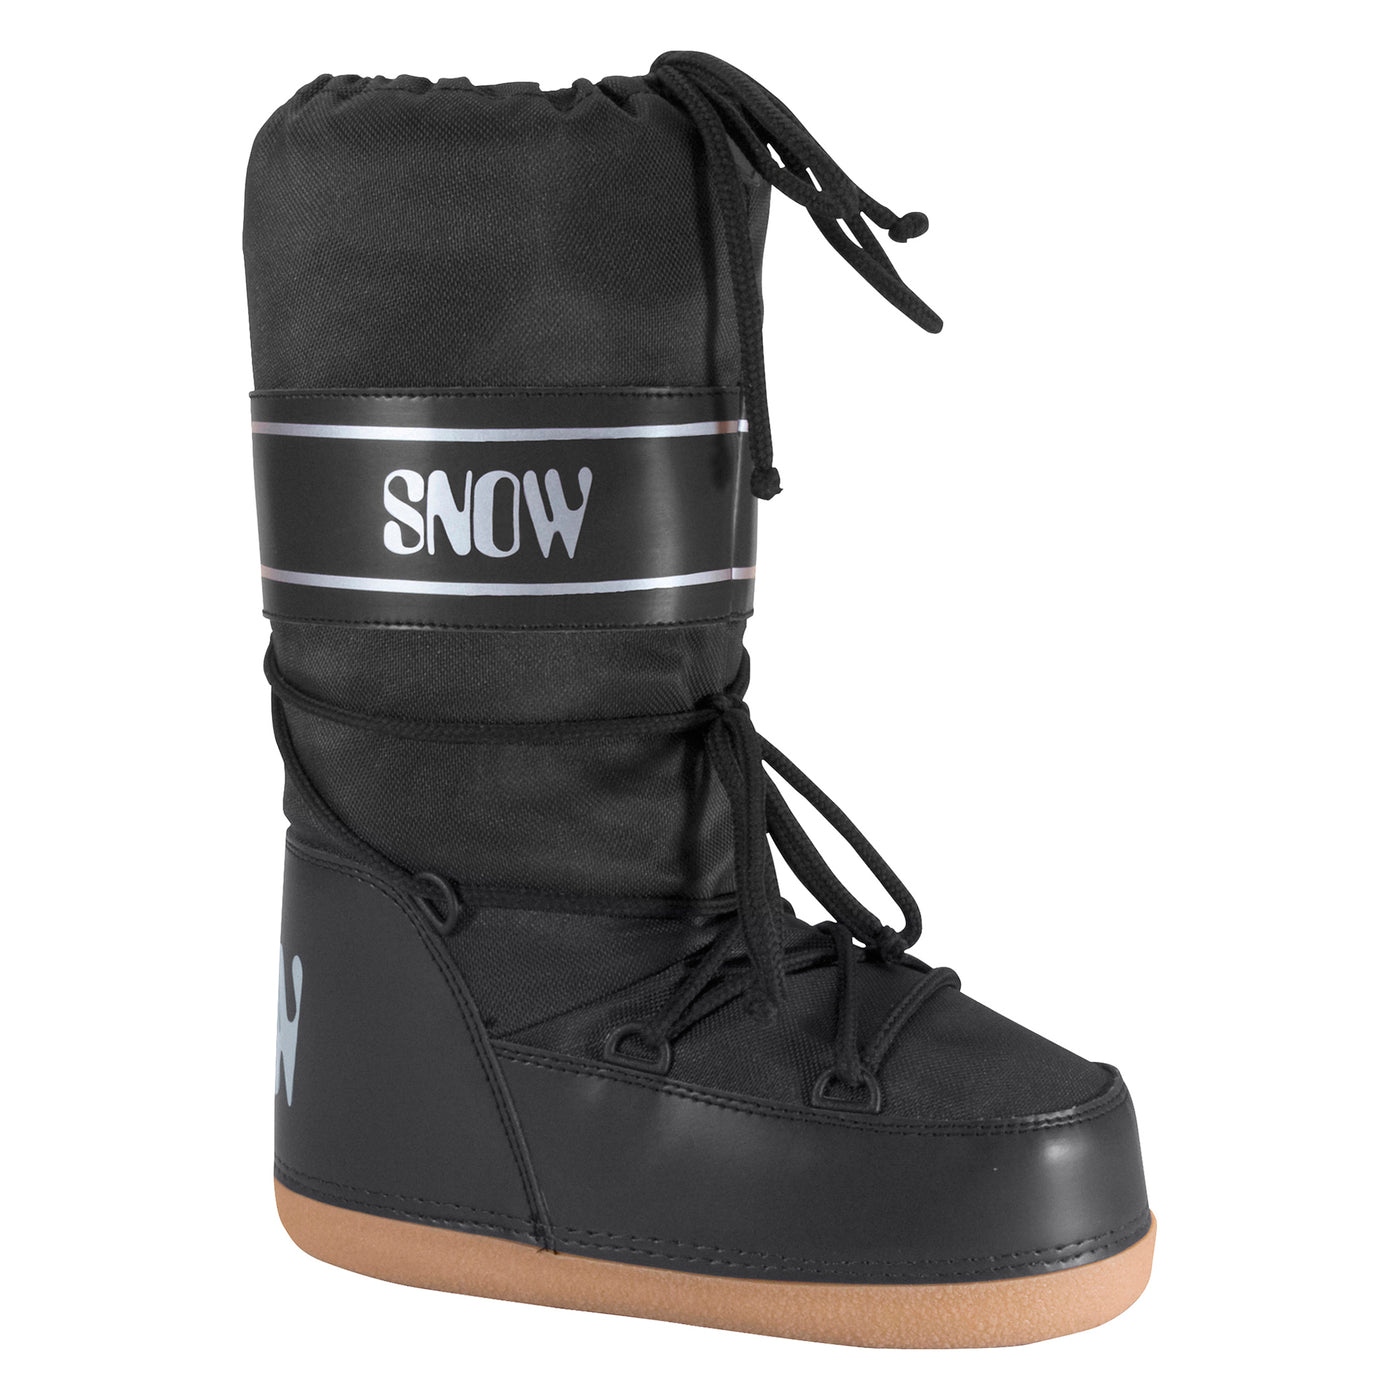 Manbi Adult Snow Boot Black - only 47/49 is available